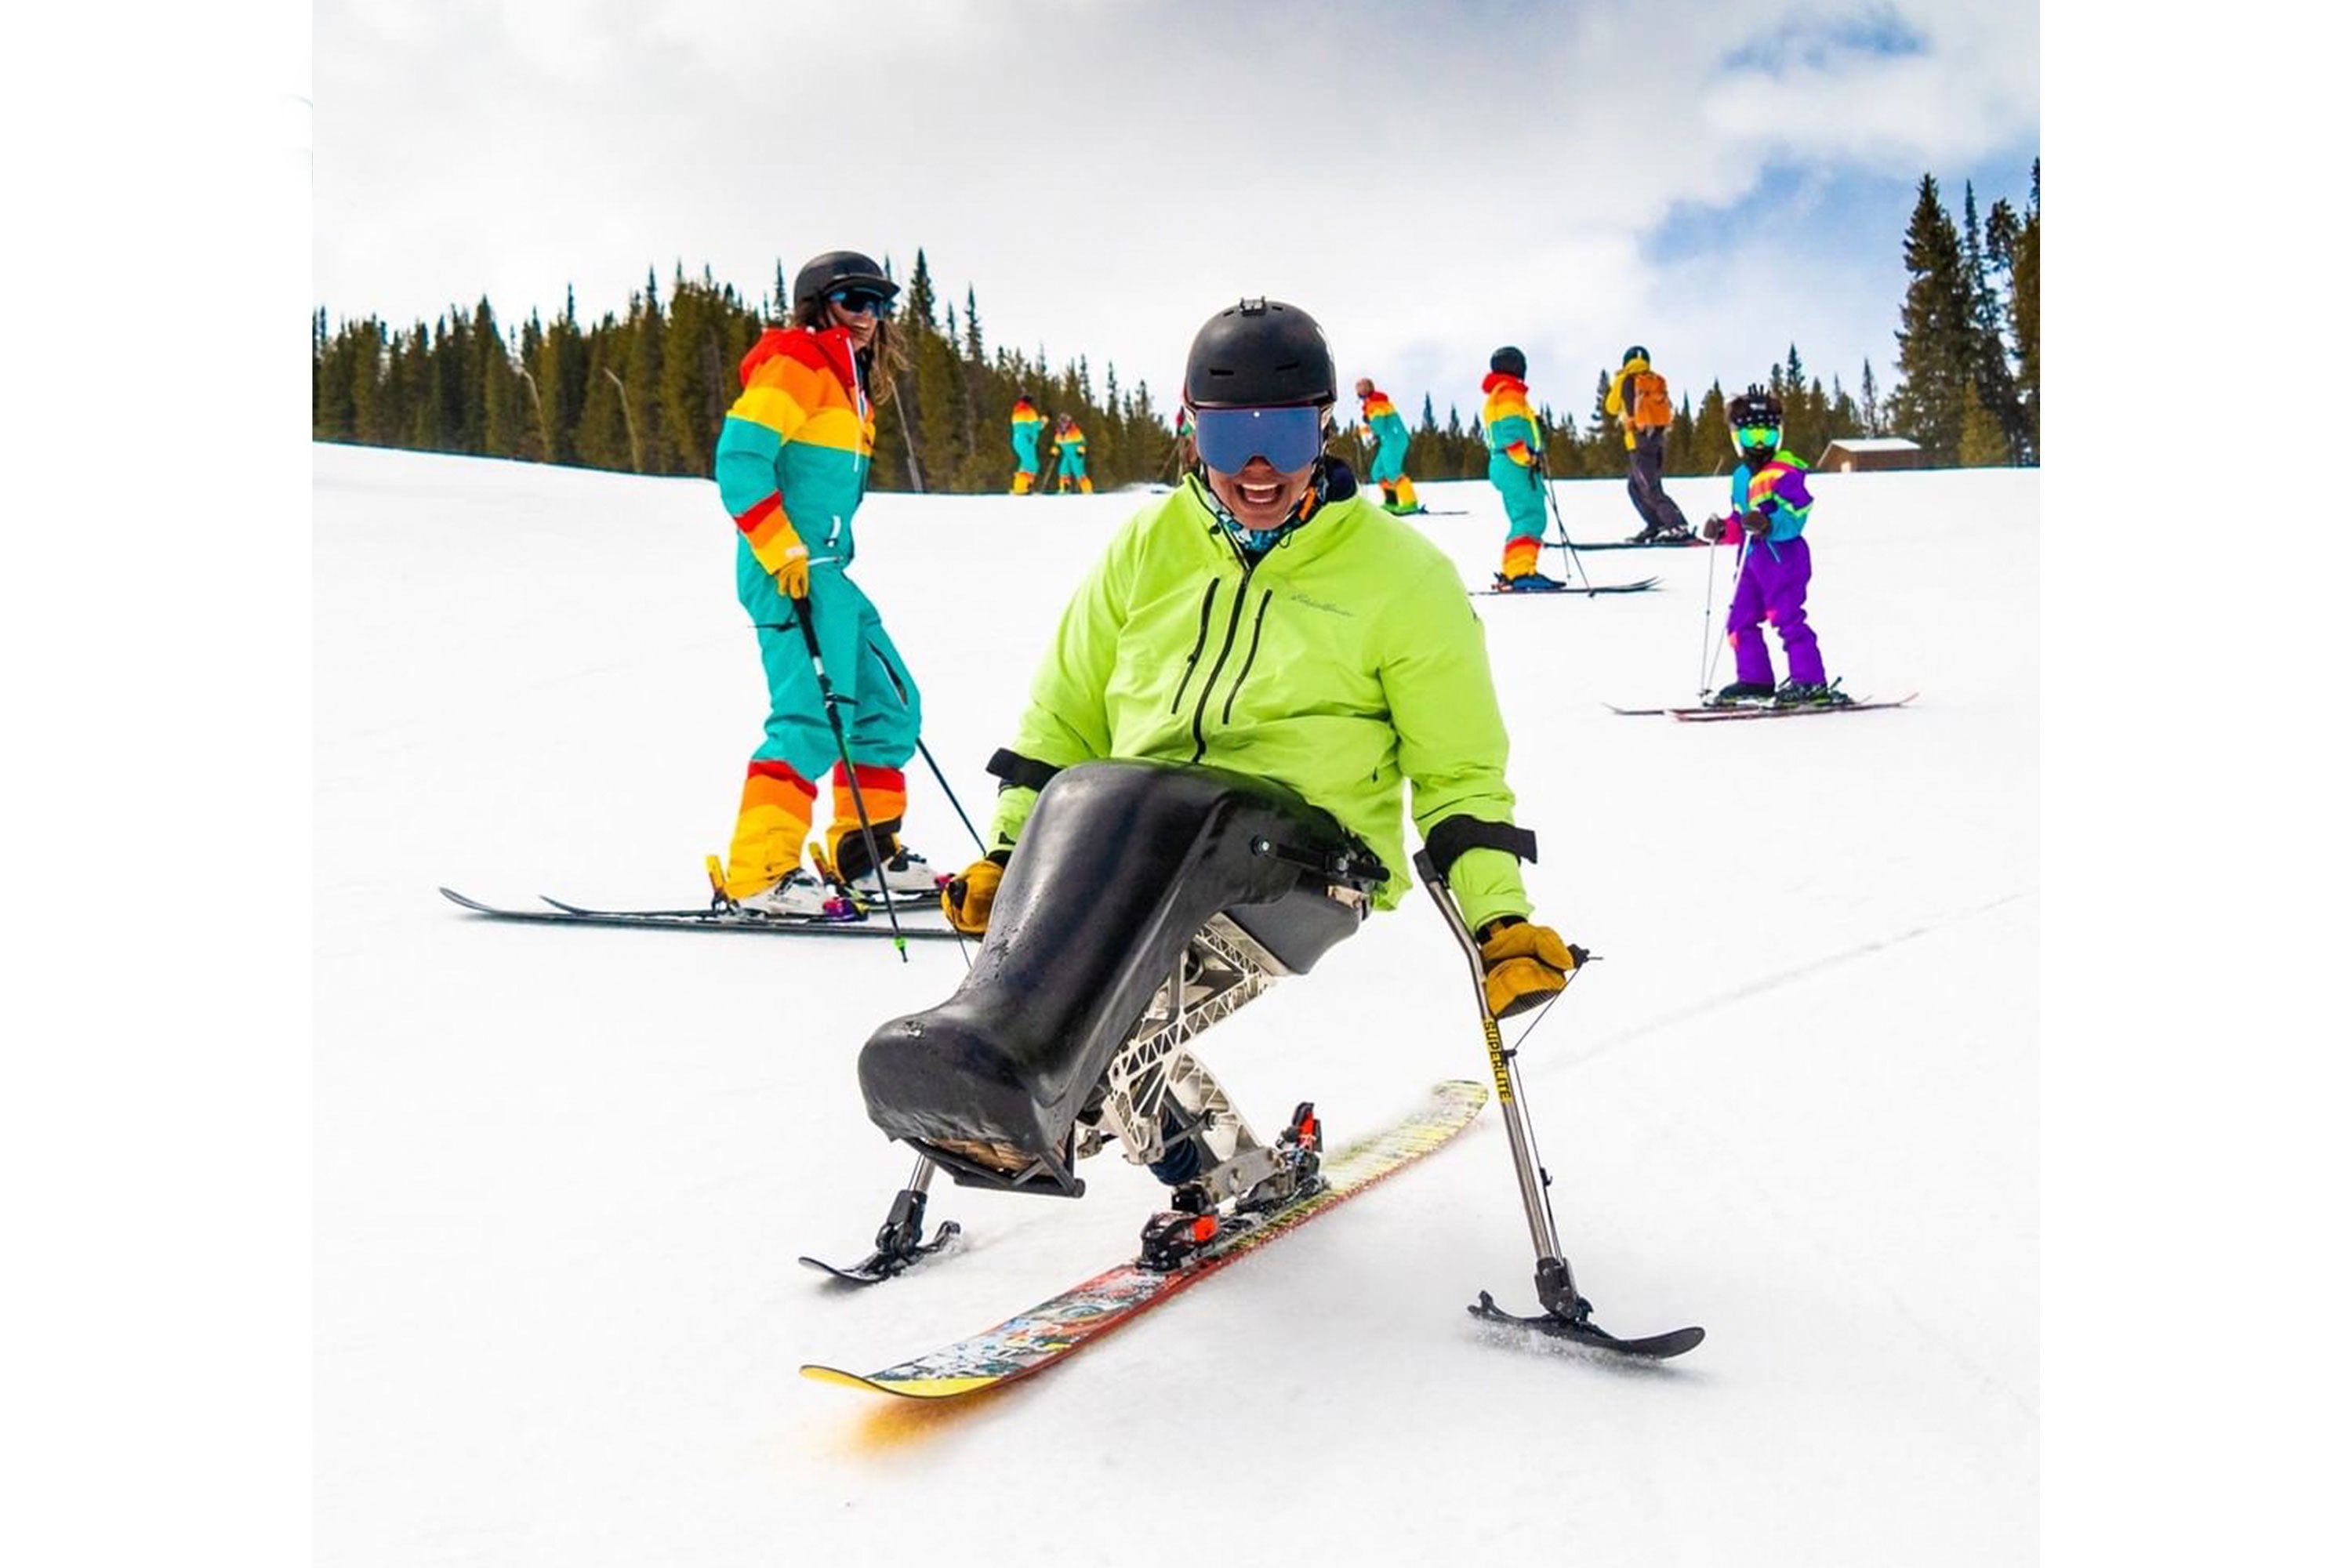 Trevor Kennison sat on his ski set with other skiers behind him on a snowy slope with pine trees in the background